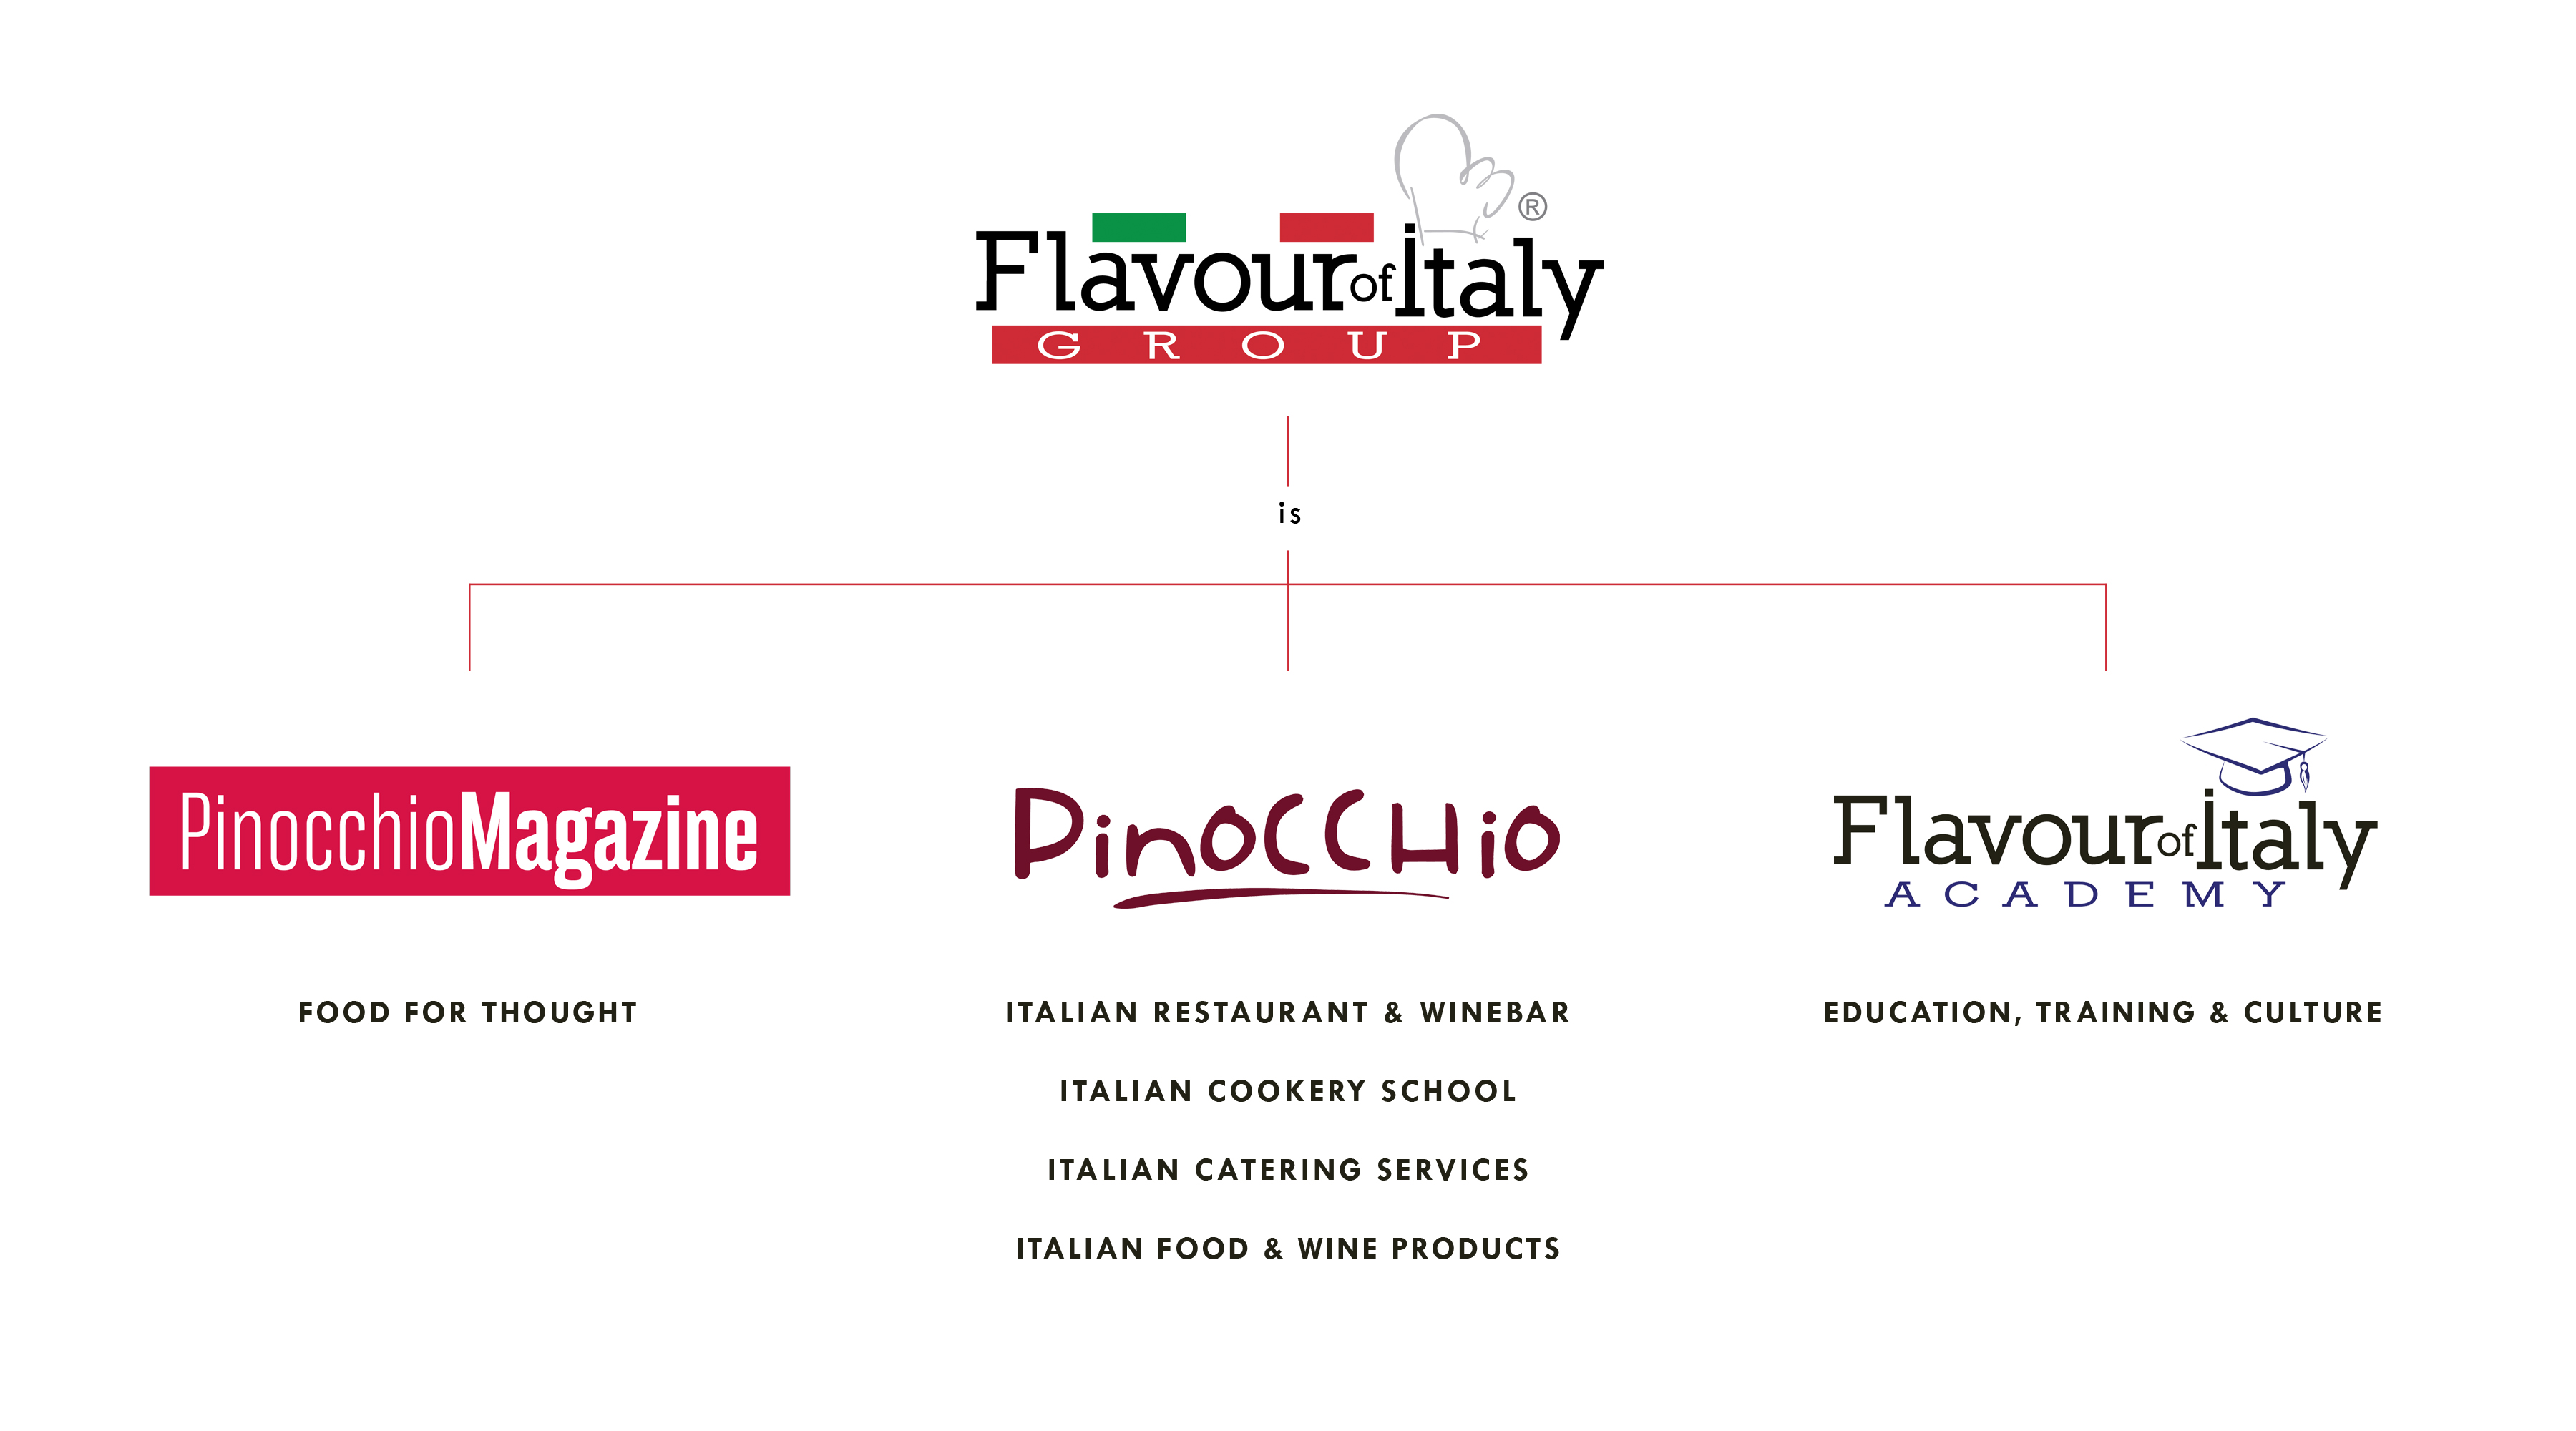 Flavour of Italy Group activities